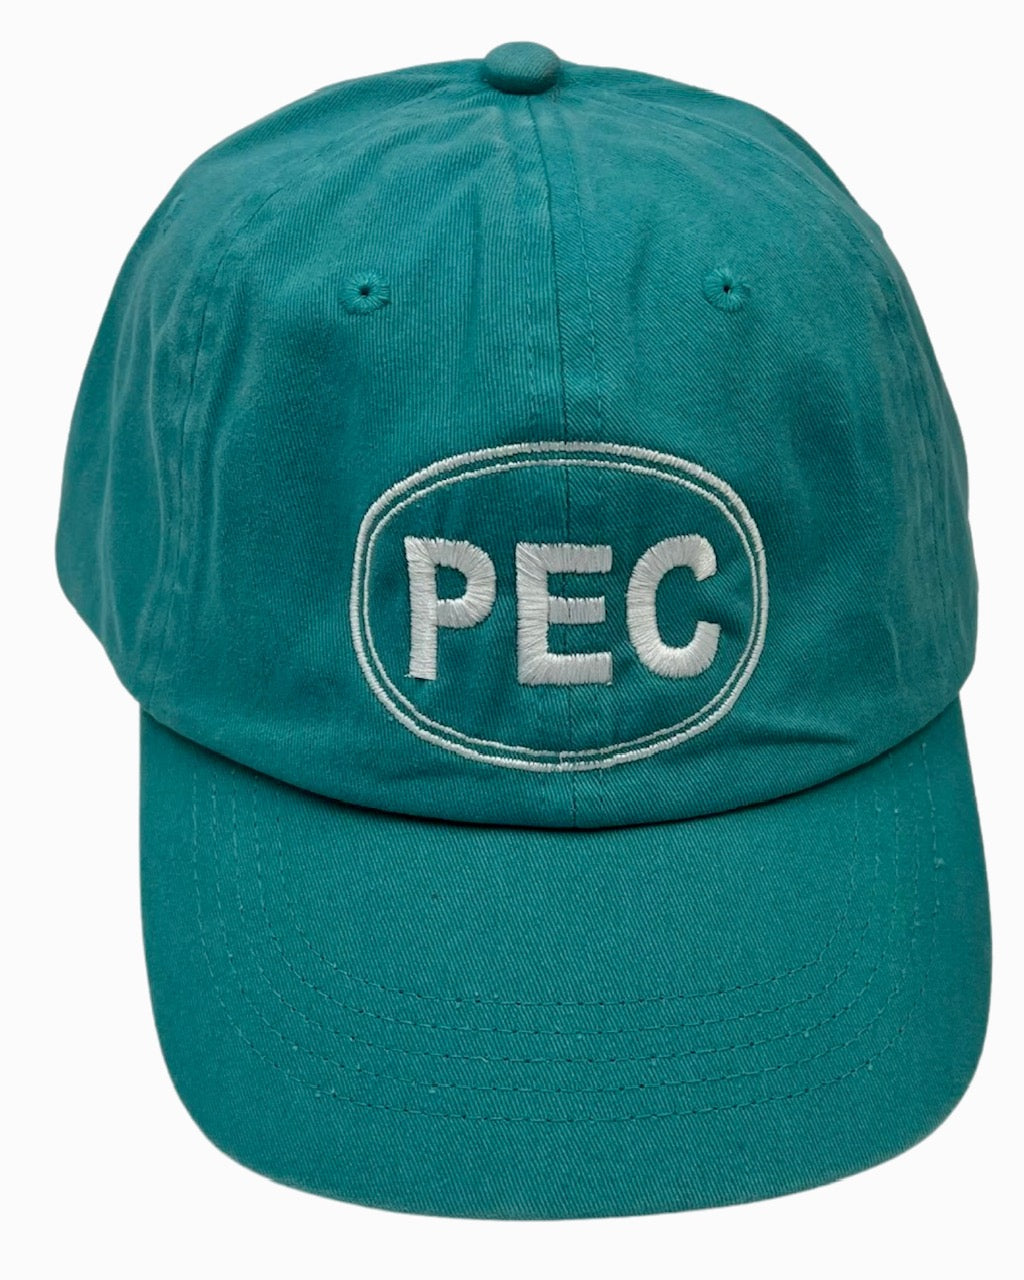  Cotton Pigment Dyed Twill Cap - Full Color Patch